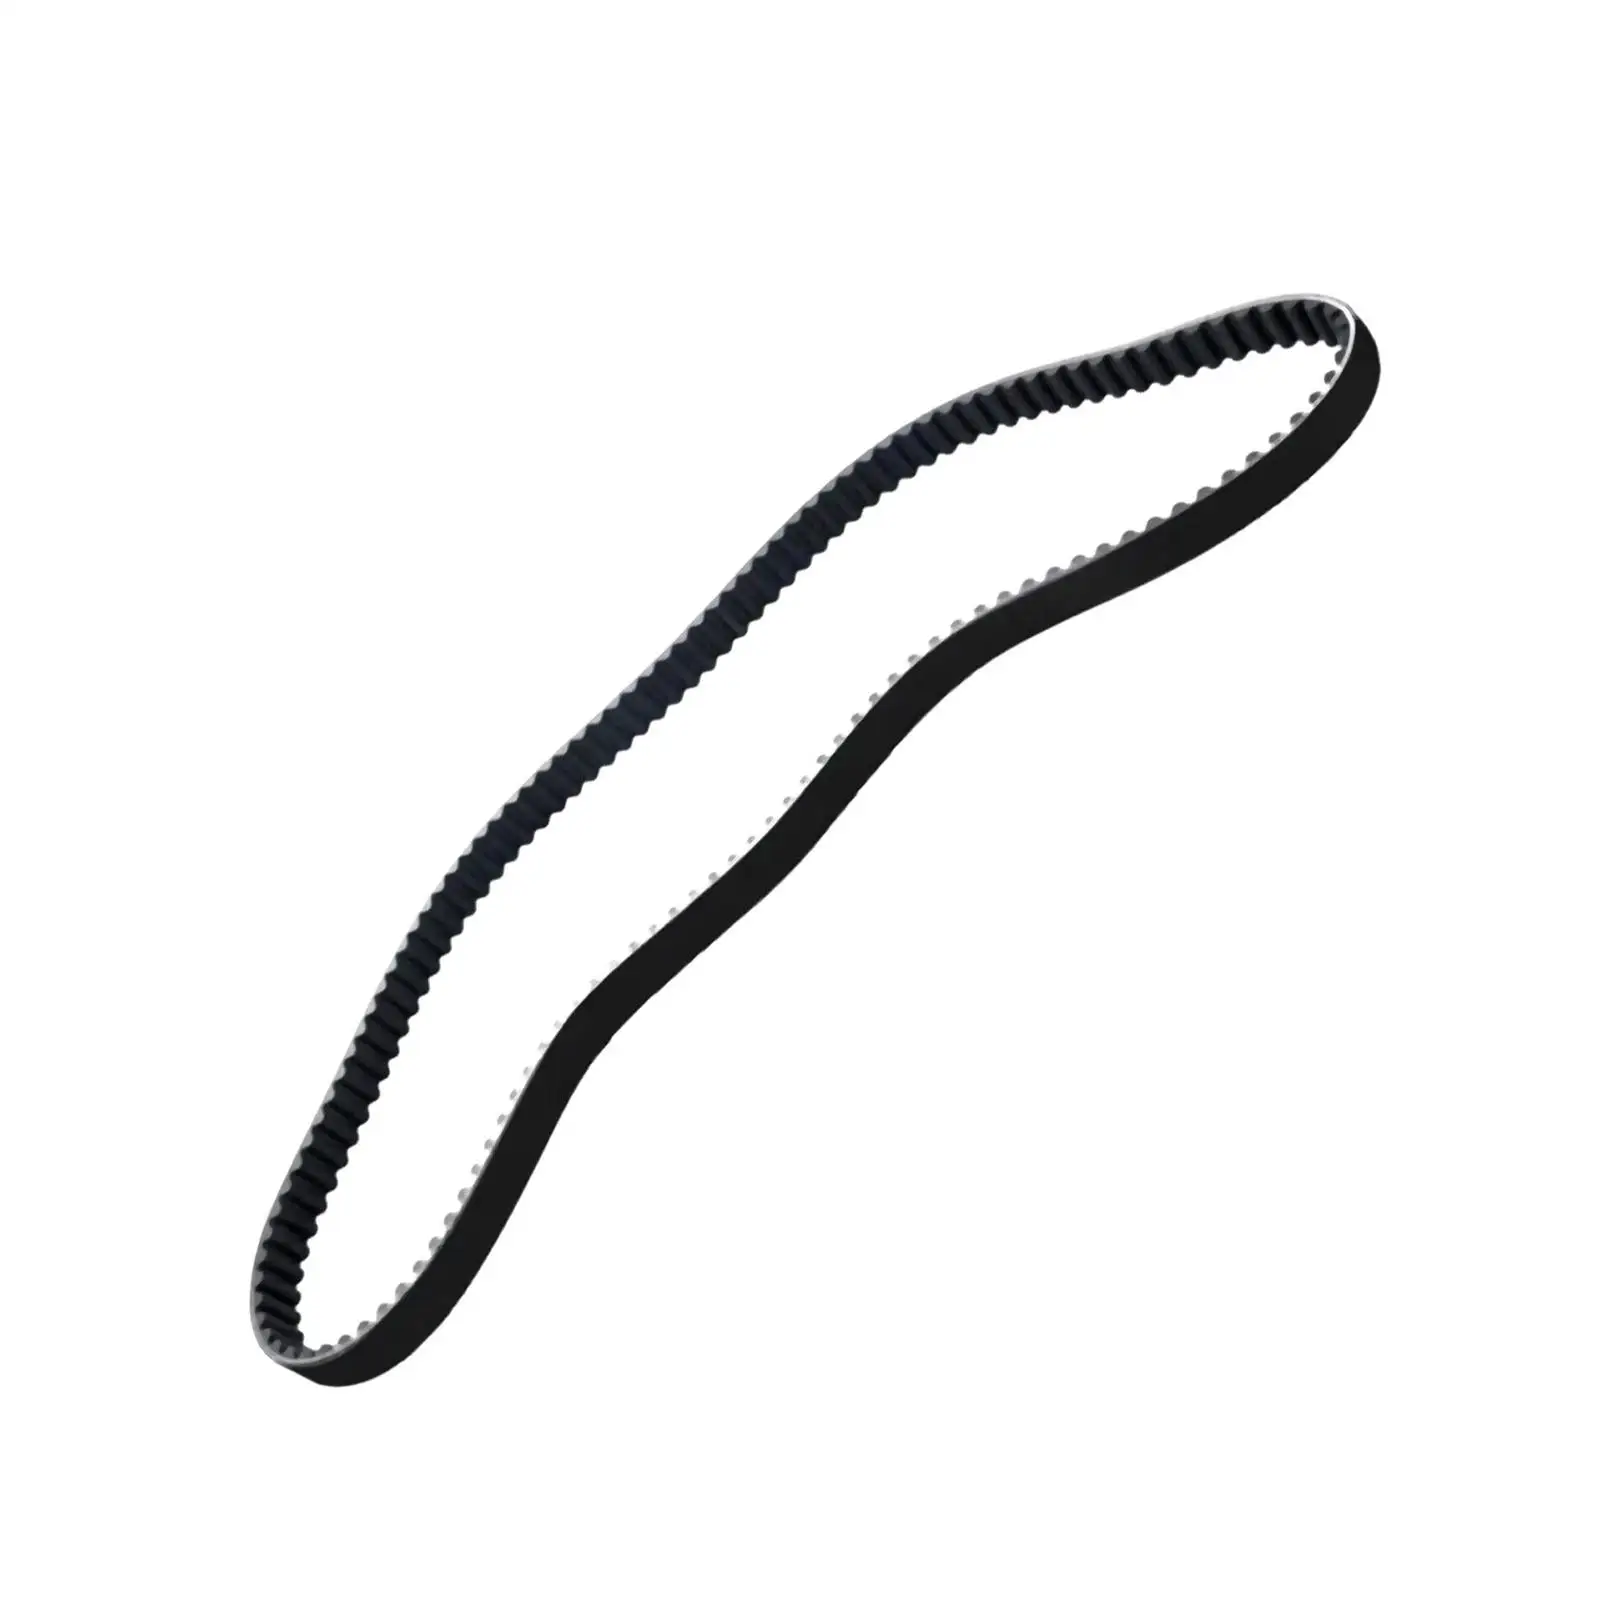 Rear Drive Belt 40001-85 Accessory 136 Tooth 1 1/2